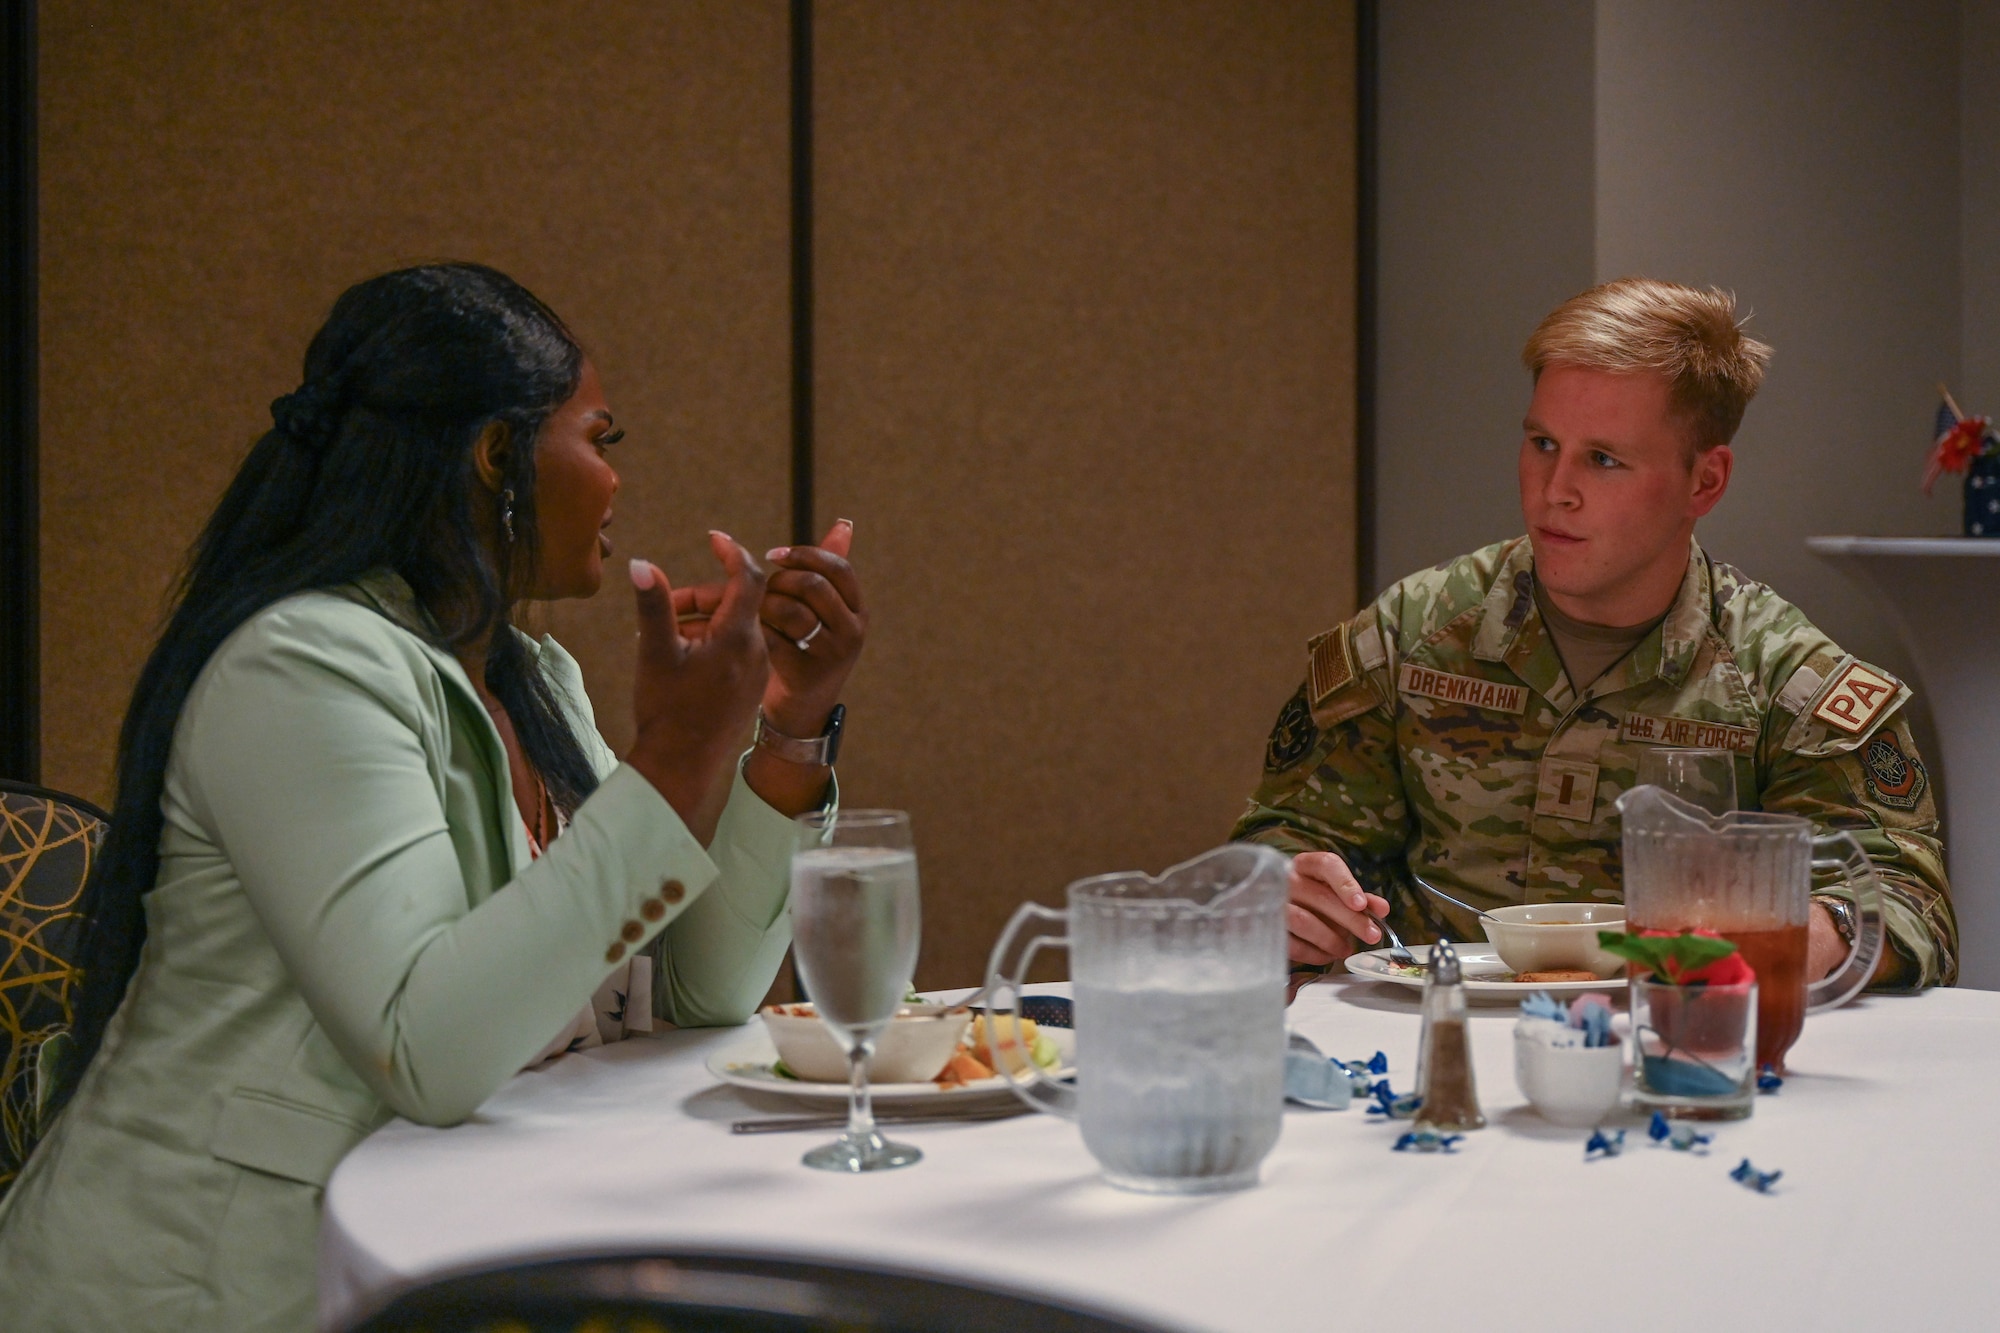 A woman eats food with a man in uniform